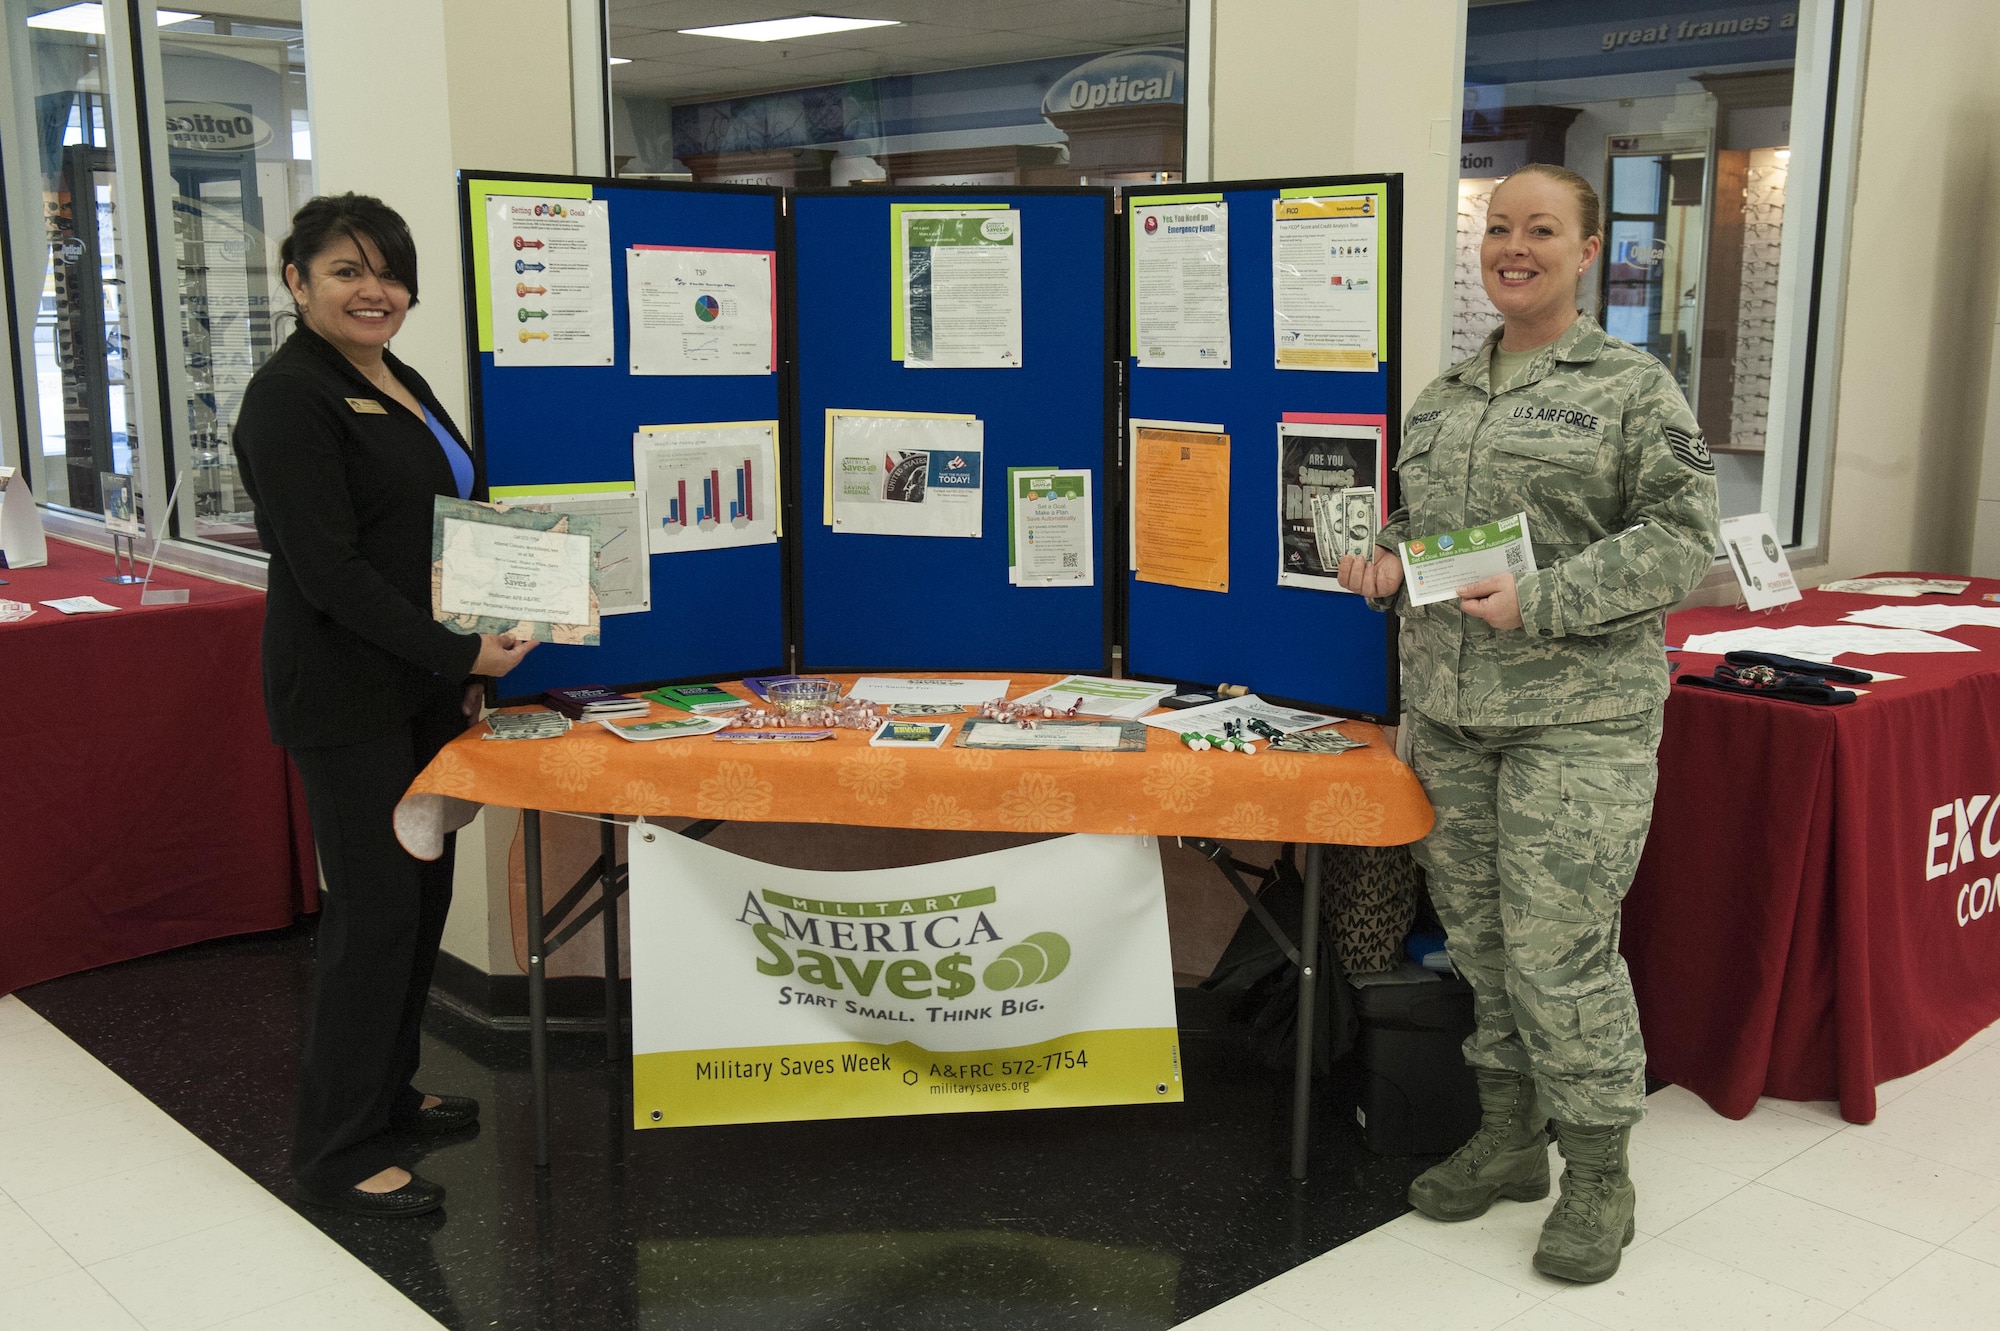 Maura Solis and Tech. Sgt. Melissa Striggles, from the Airman and Family Readiness Center, pose for a photo at Holloman Air Force Base, N.M., Feb. 27, 2017. All week long the AFRC will have representatives at the Base Exchange assisting Airmen with their savings plans and encouraging them to save throughout their career. (U.S. Air Force photo by Airman Ilyana A. Escalona)